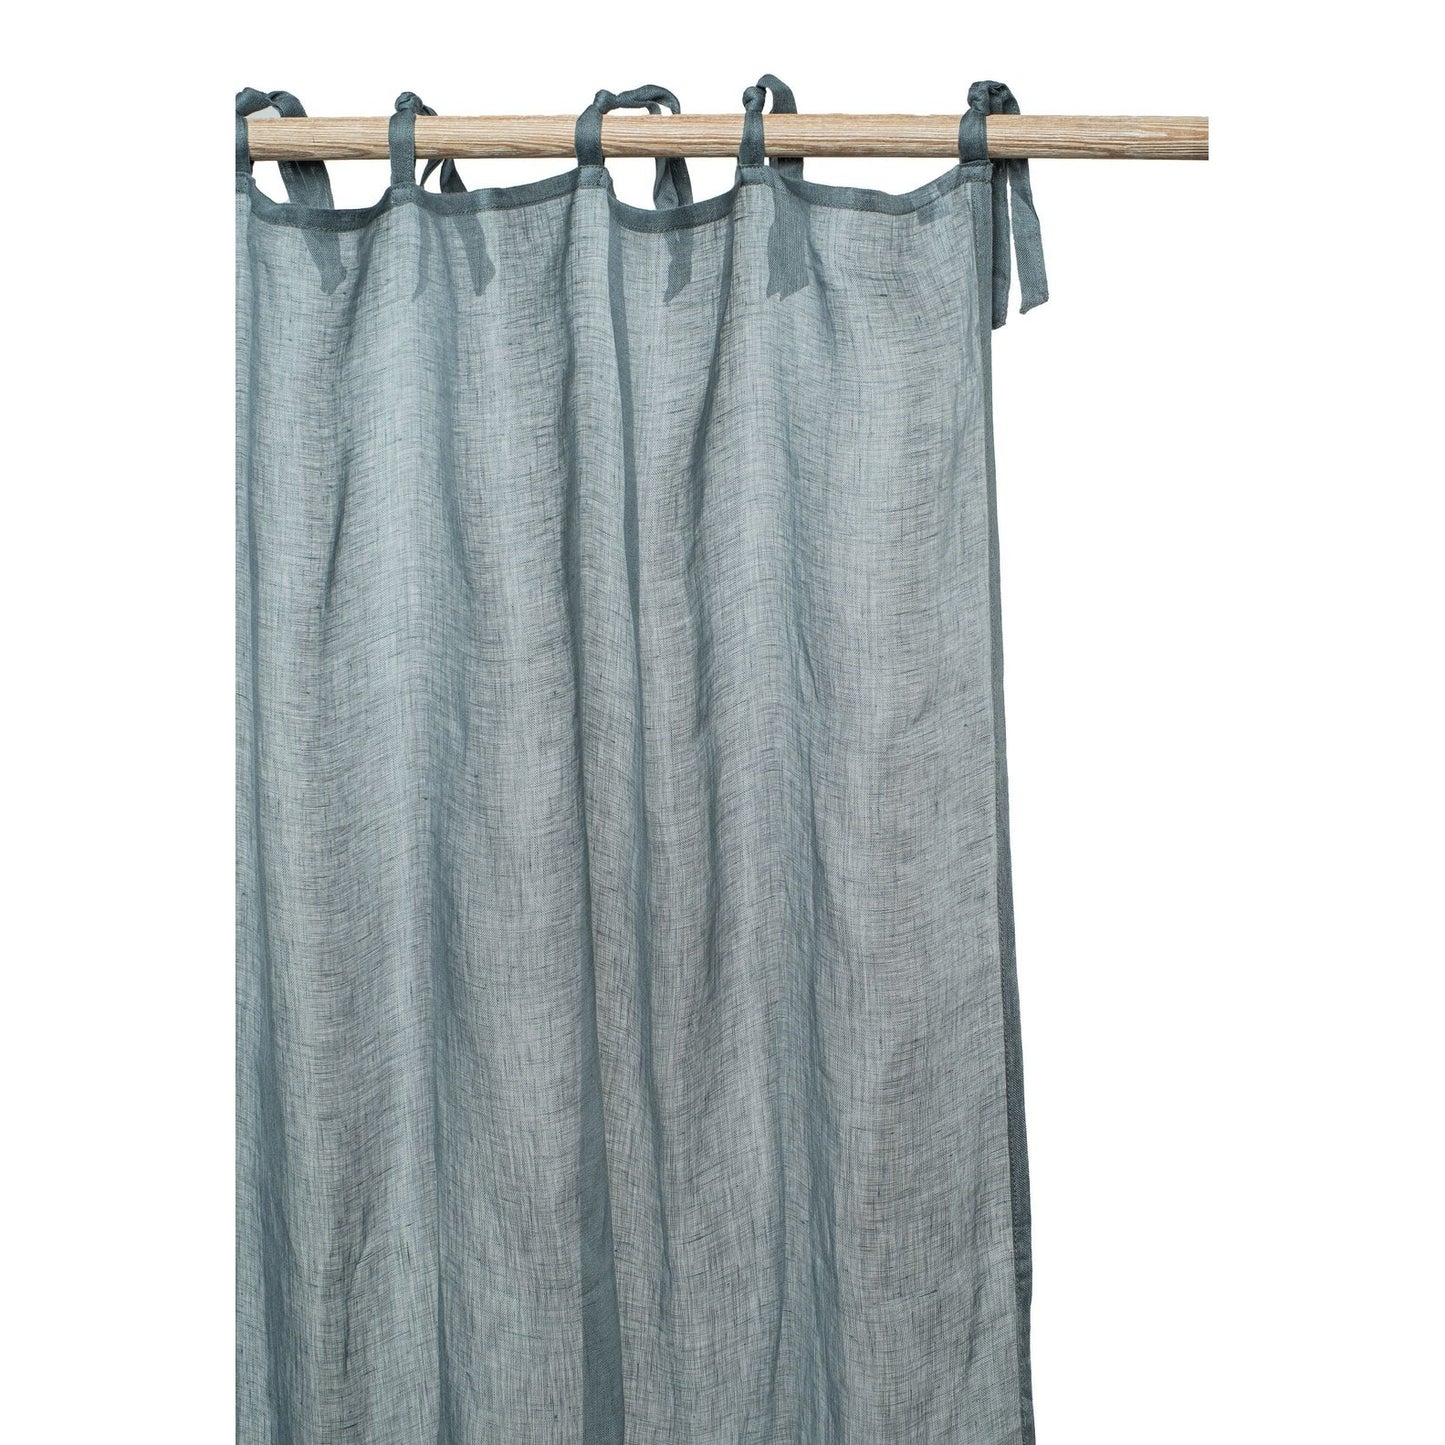 Choose Off-White for a soft touch or Grey for modern drama with the Lidi Sheer Curtain.